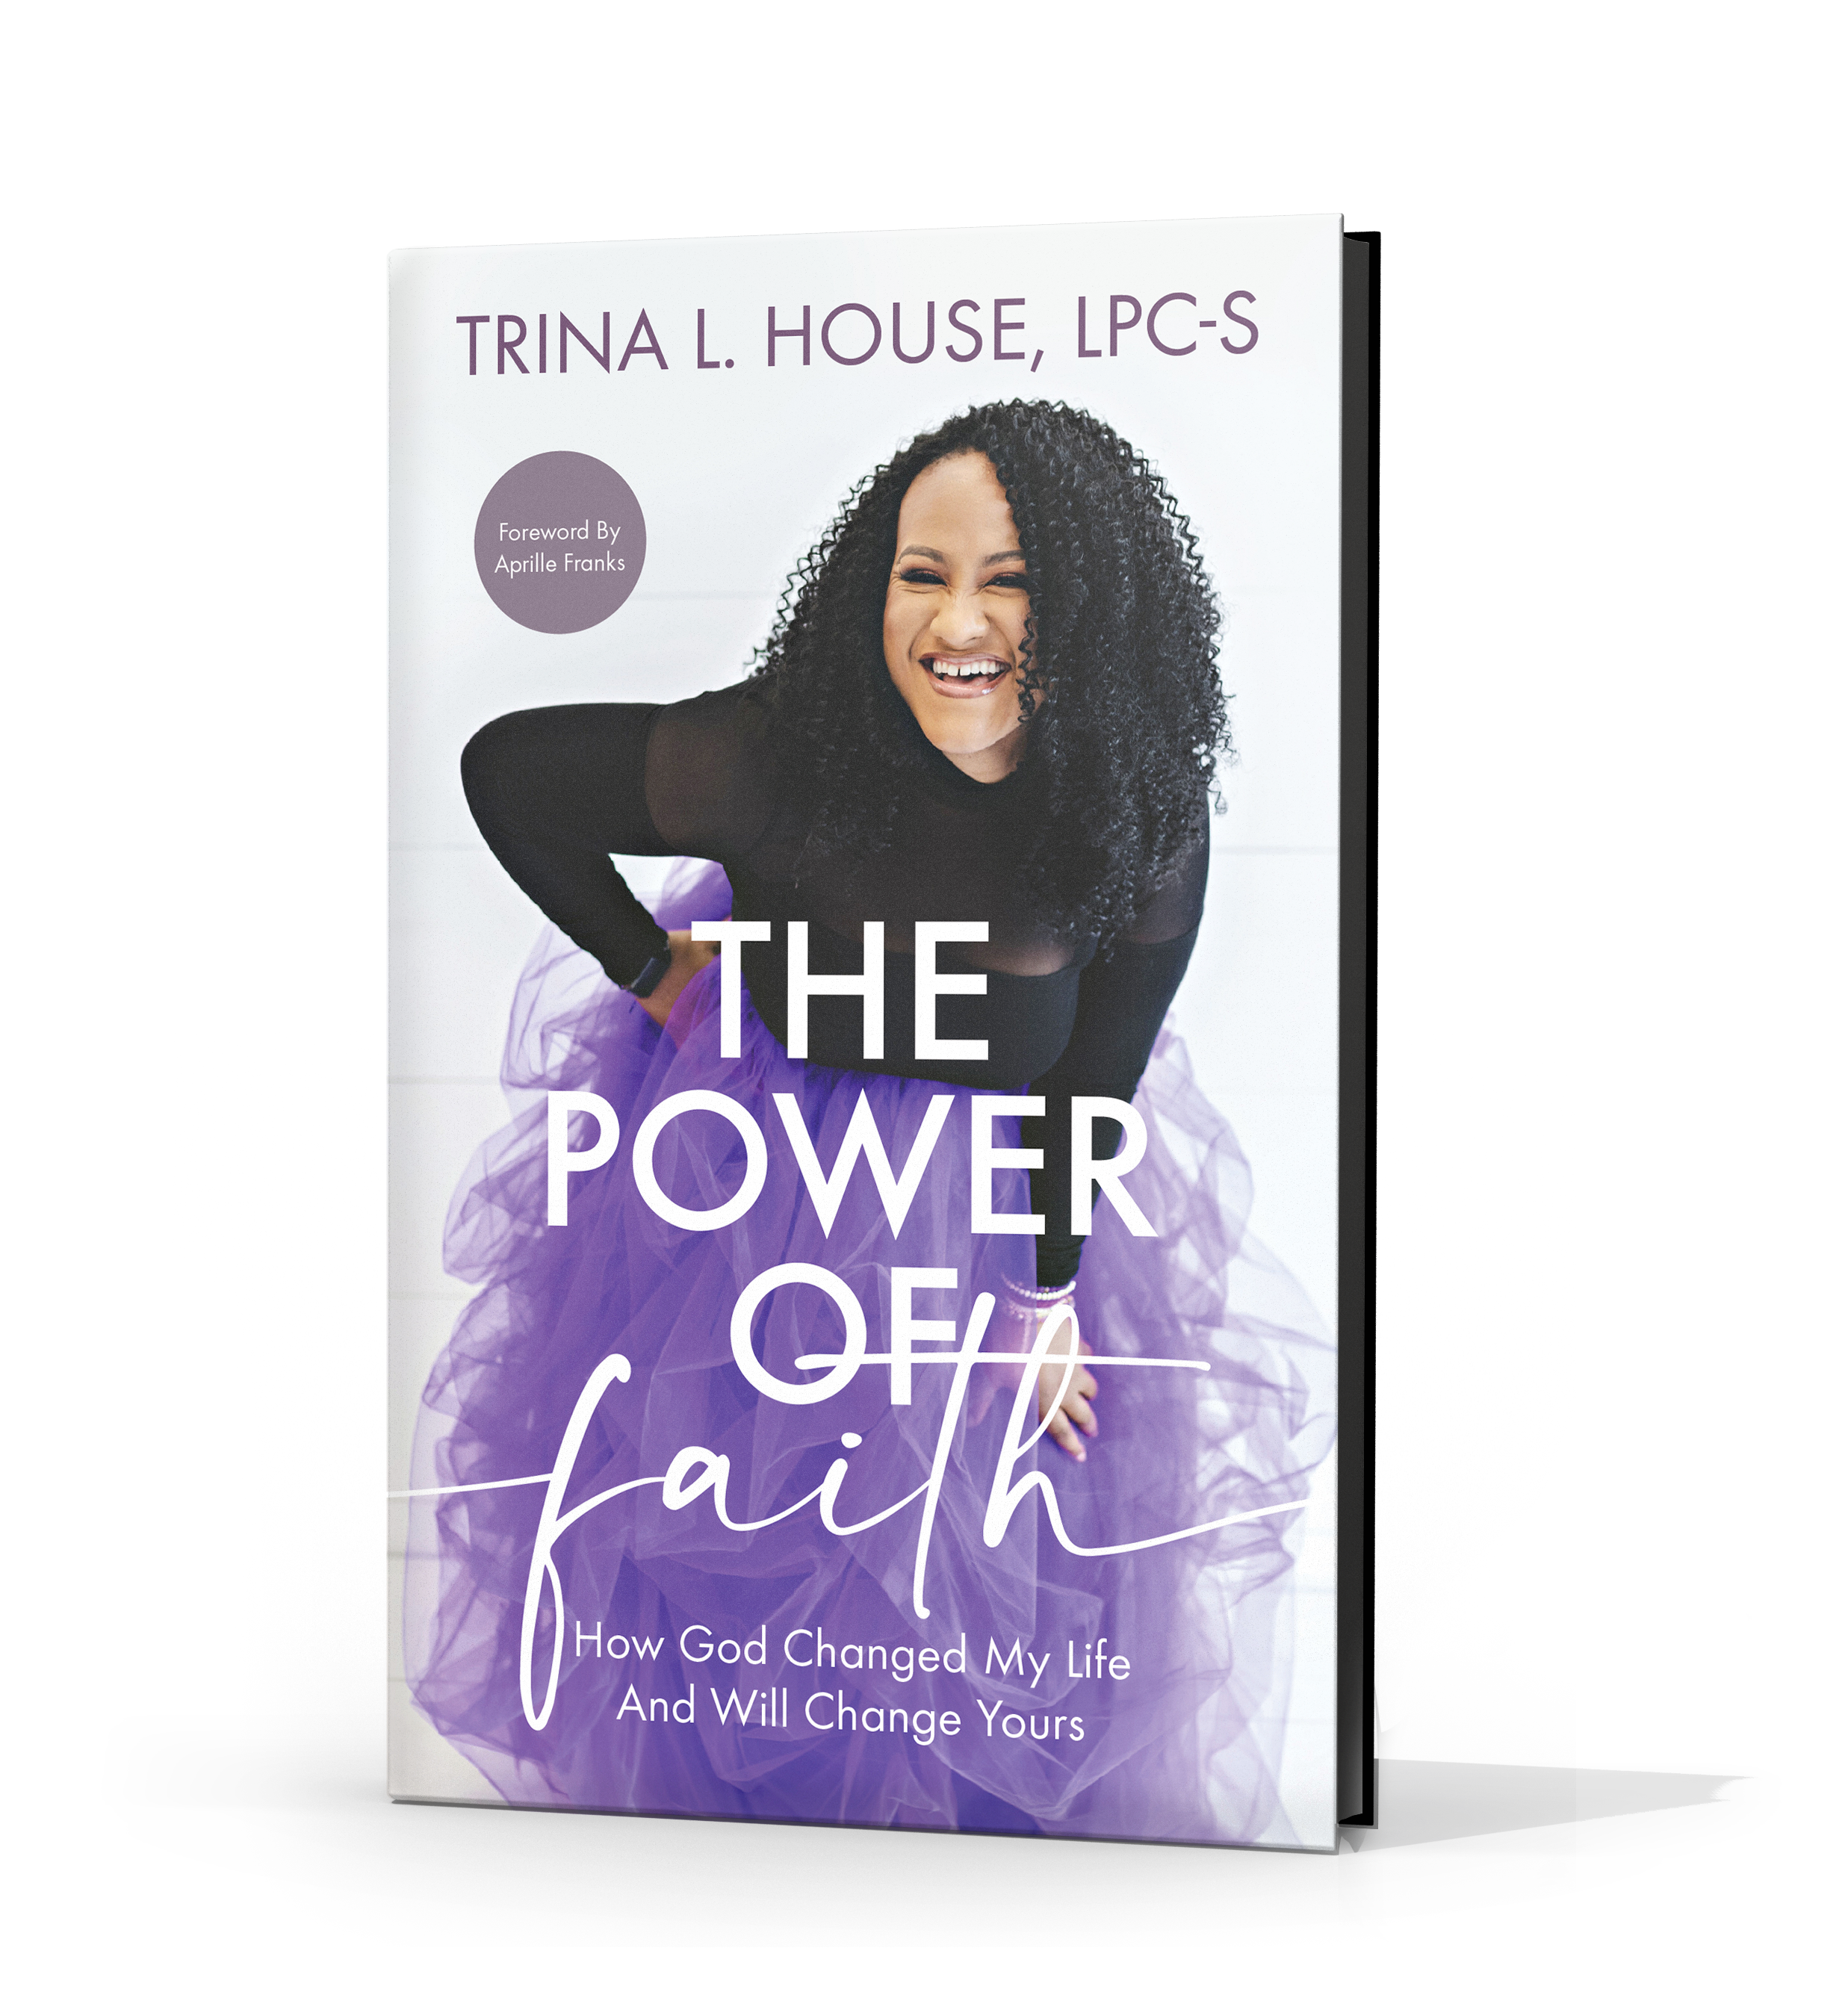 Counselor and Bestselling Author Releases Memoir on the Power of Faith